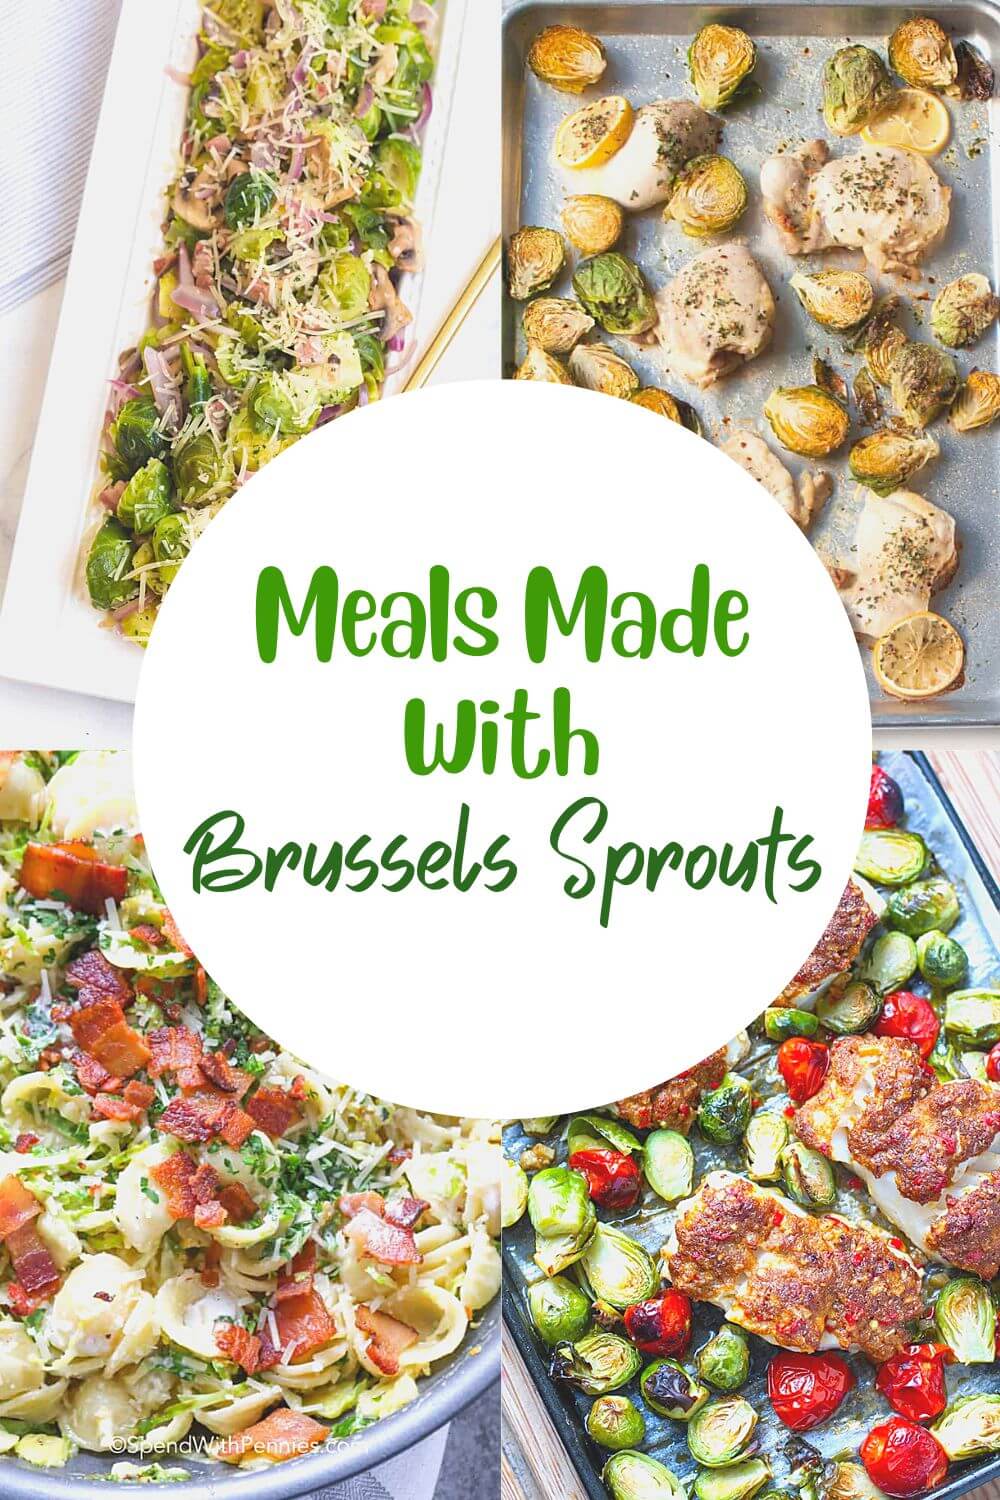 Pinterest pin - images of various Brussel sprout dishes